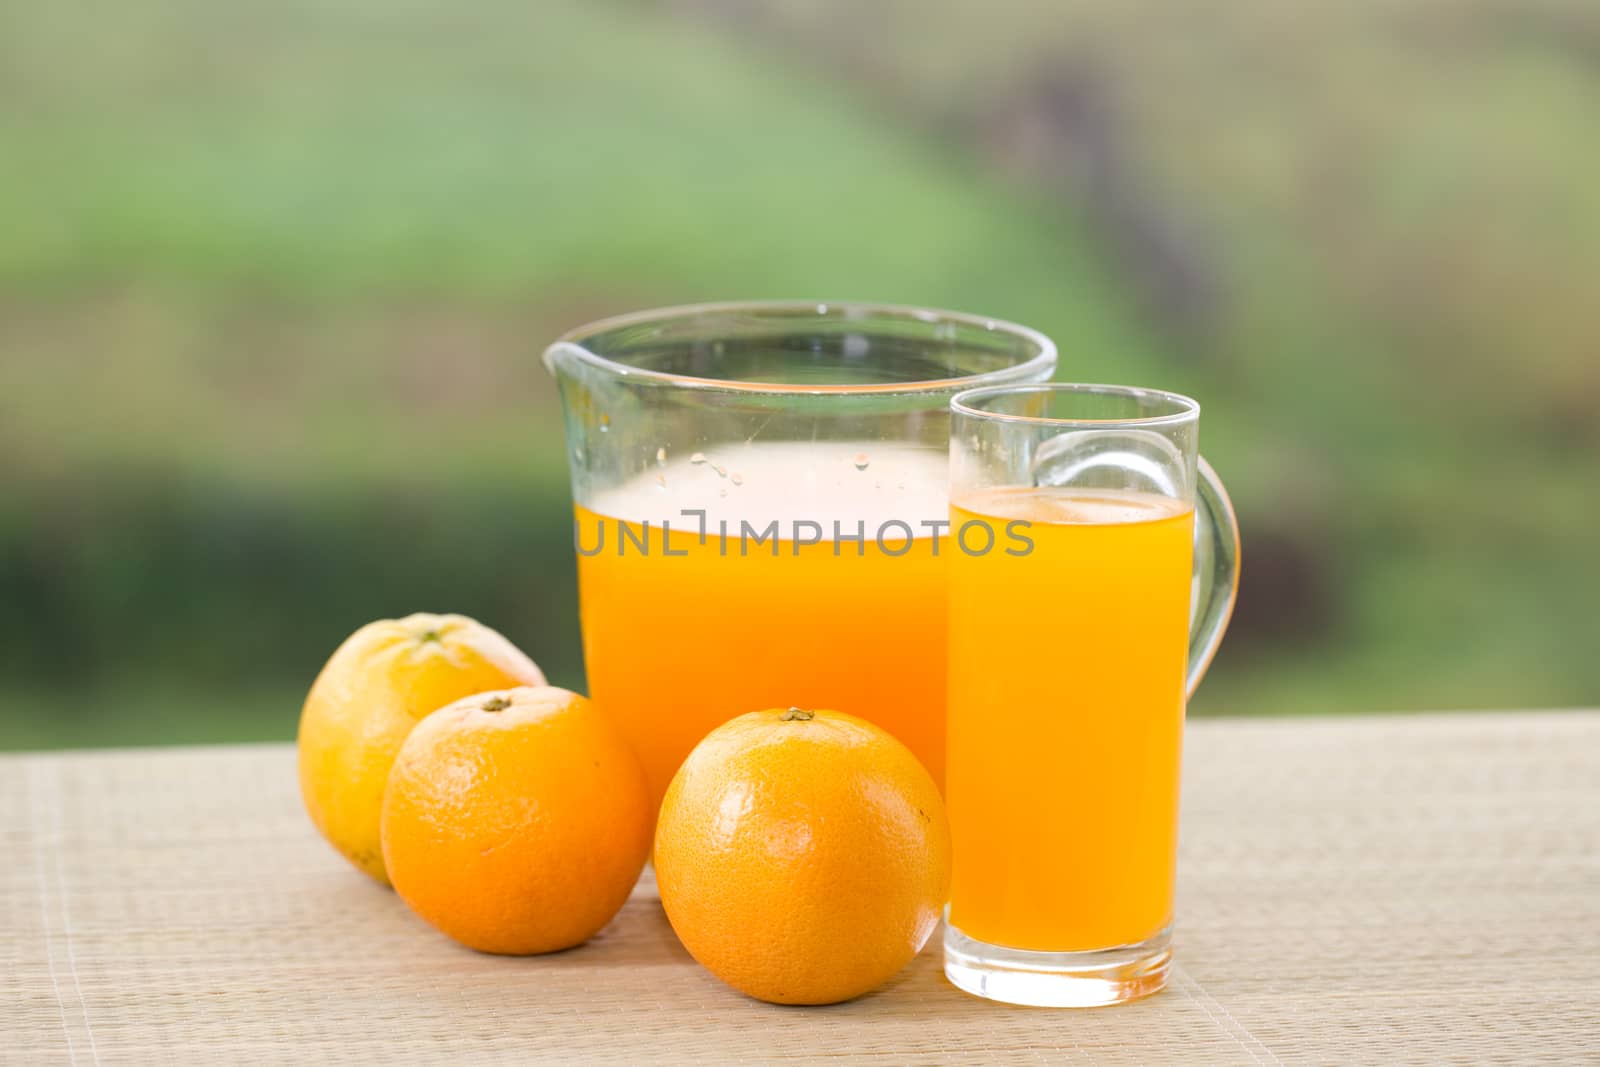 glass of delicious orange juice and oranges on table in garden